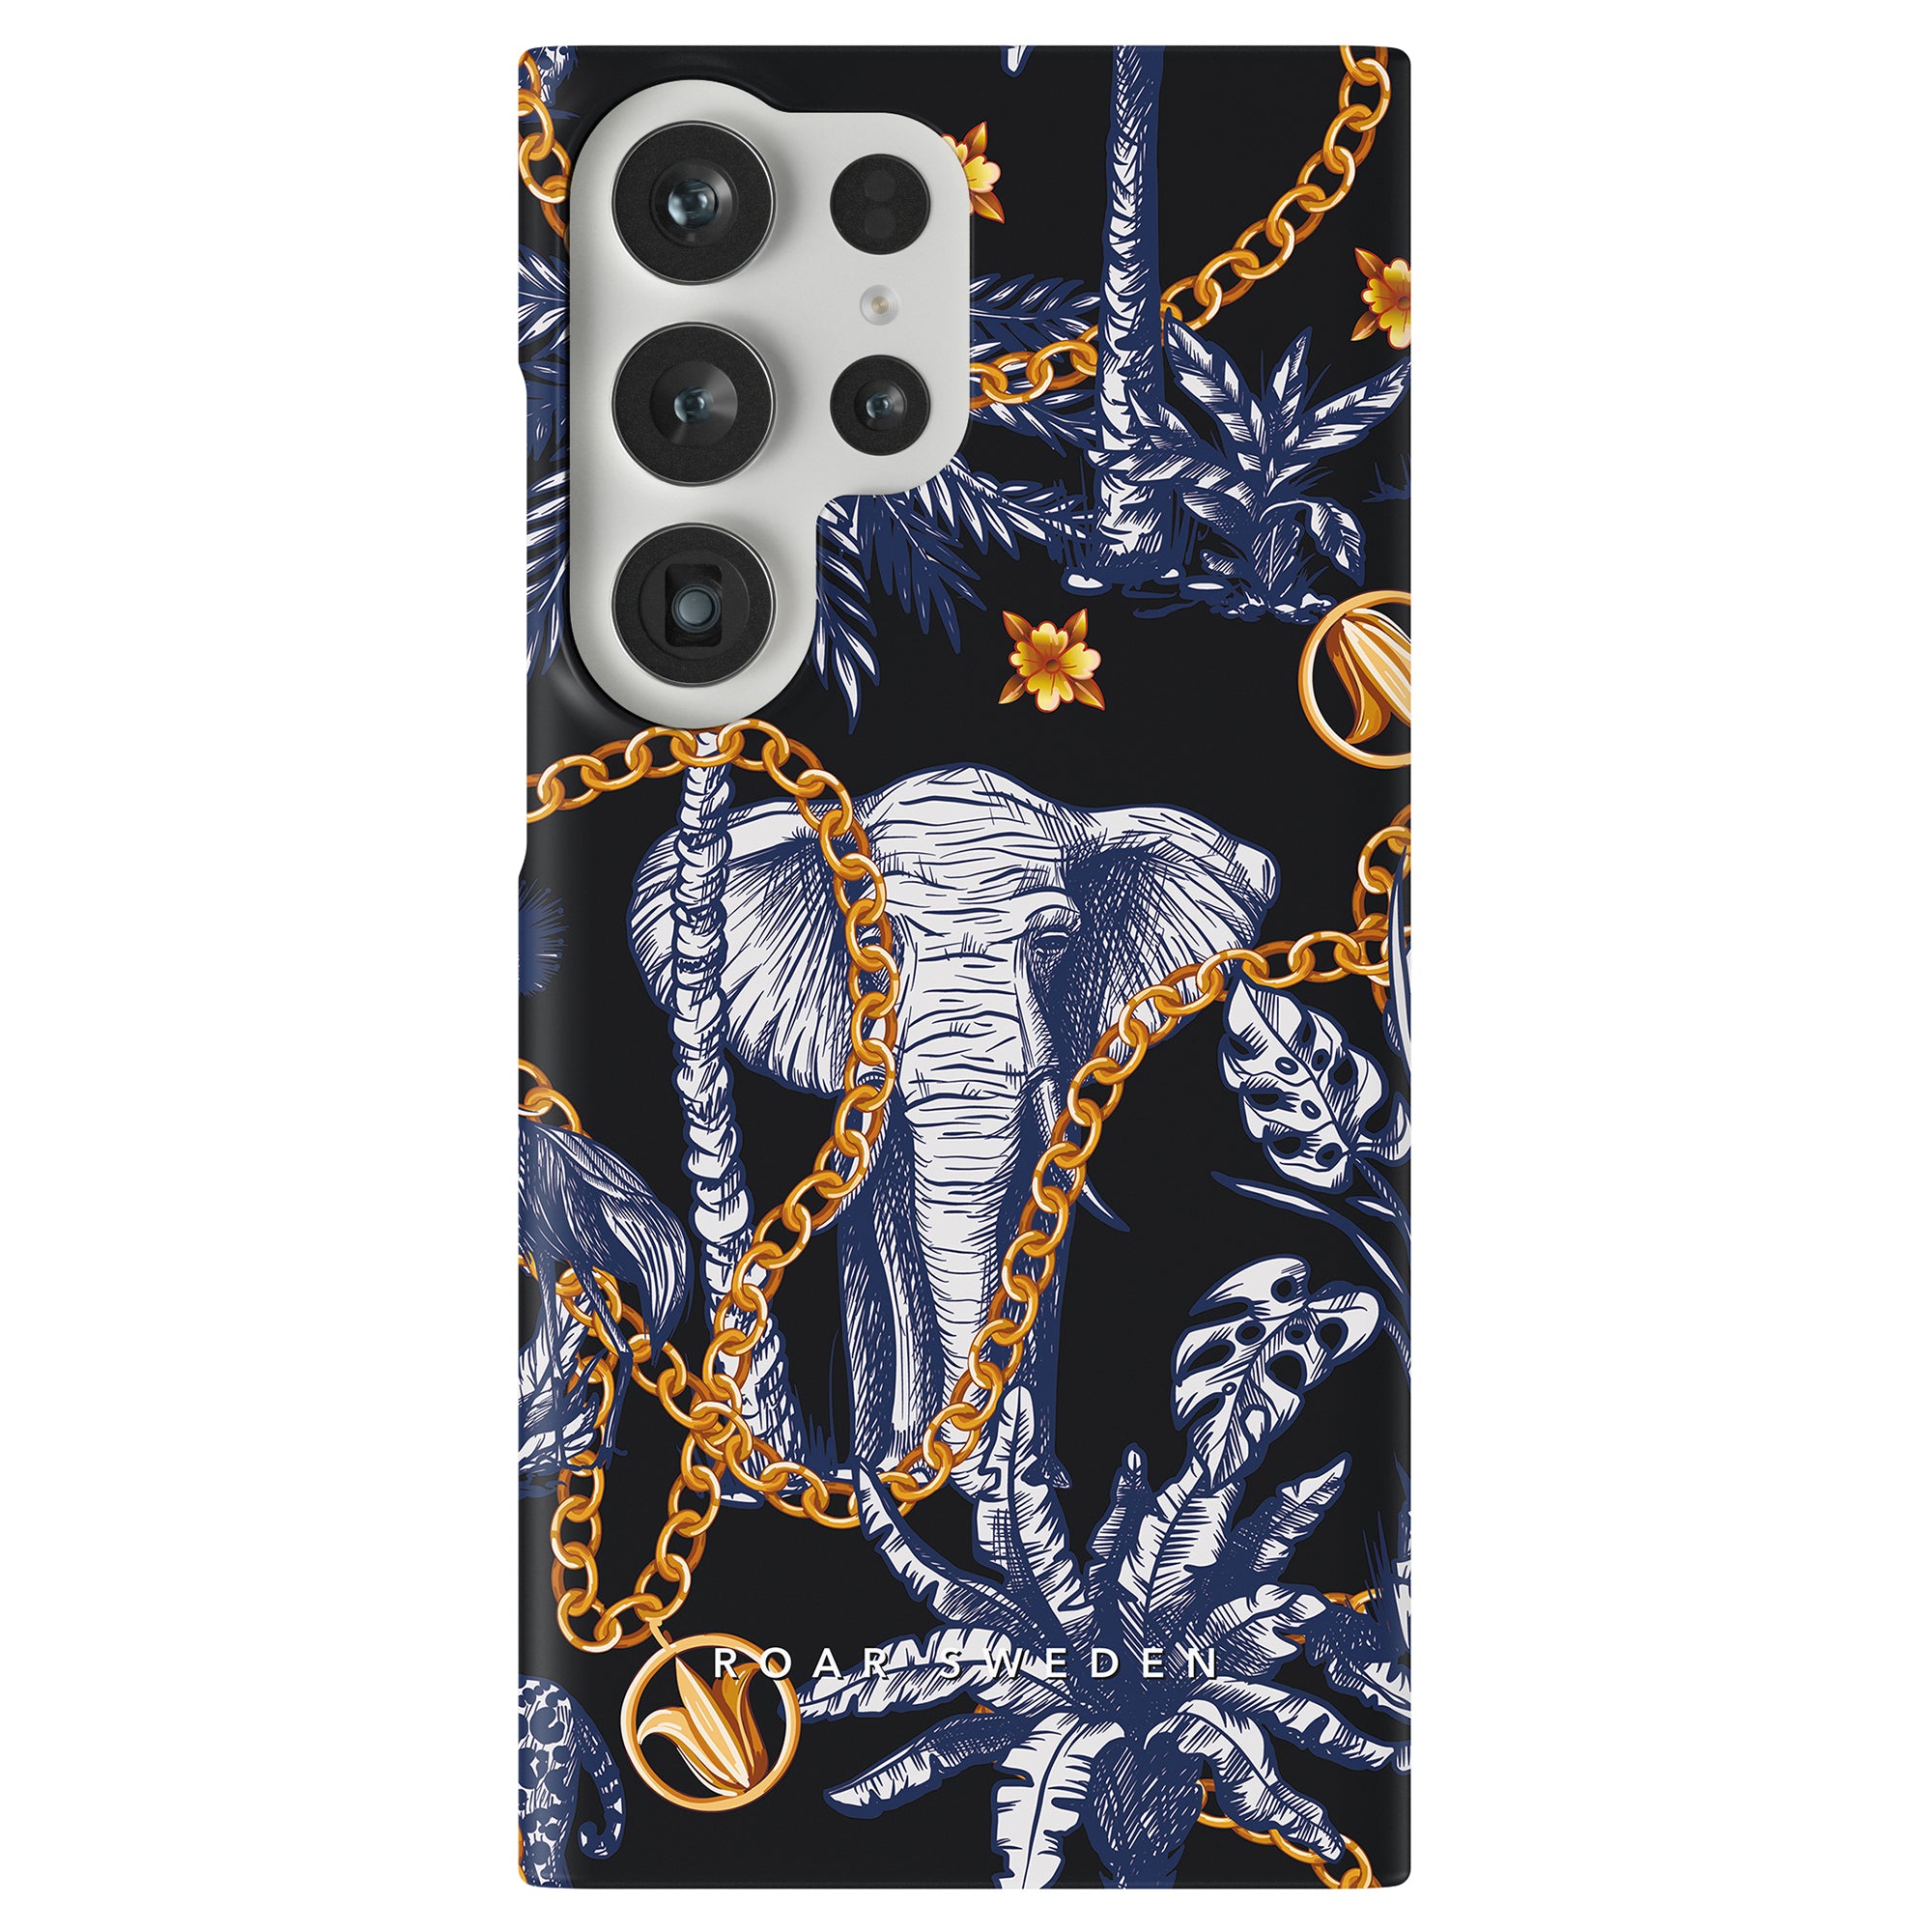 The Safari - Slim case is a stylish and trendy phone case featuring a captivating design of an elephant surrounded by lush palm trees. This unique mobile phone accessory not only offers protection for your device but also